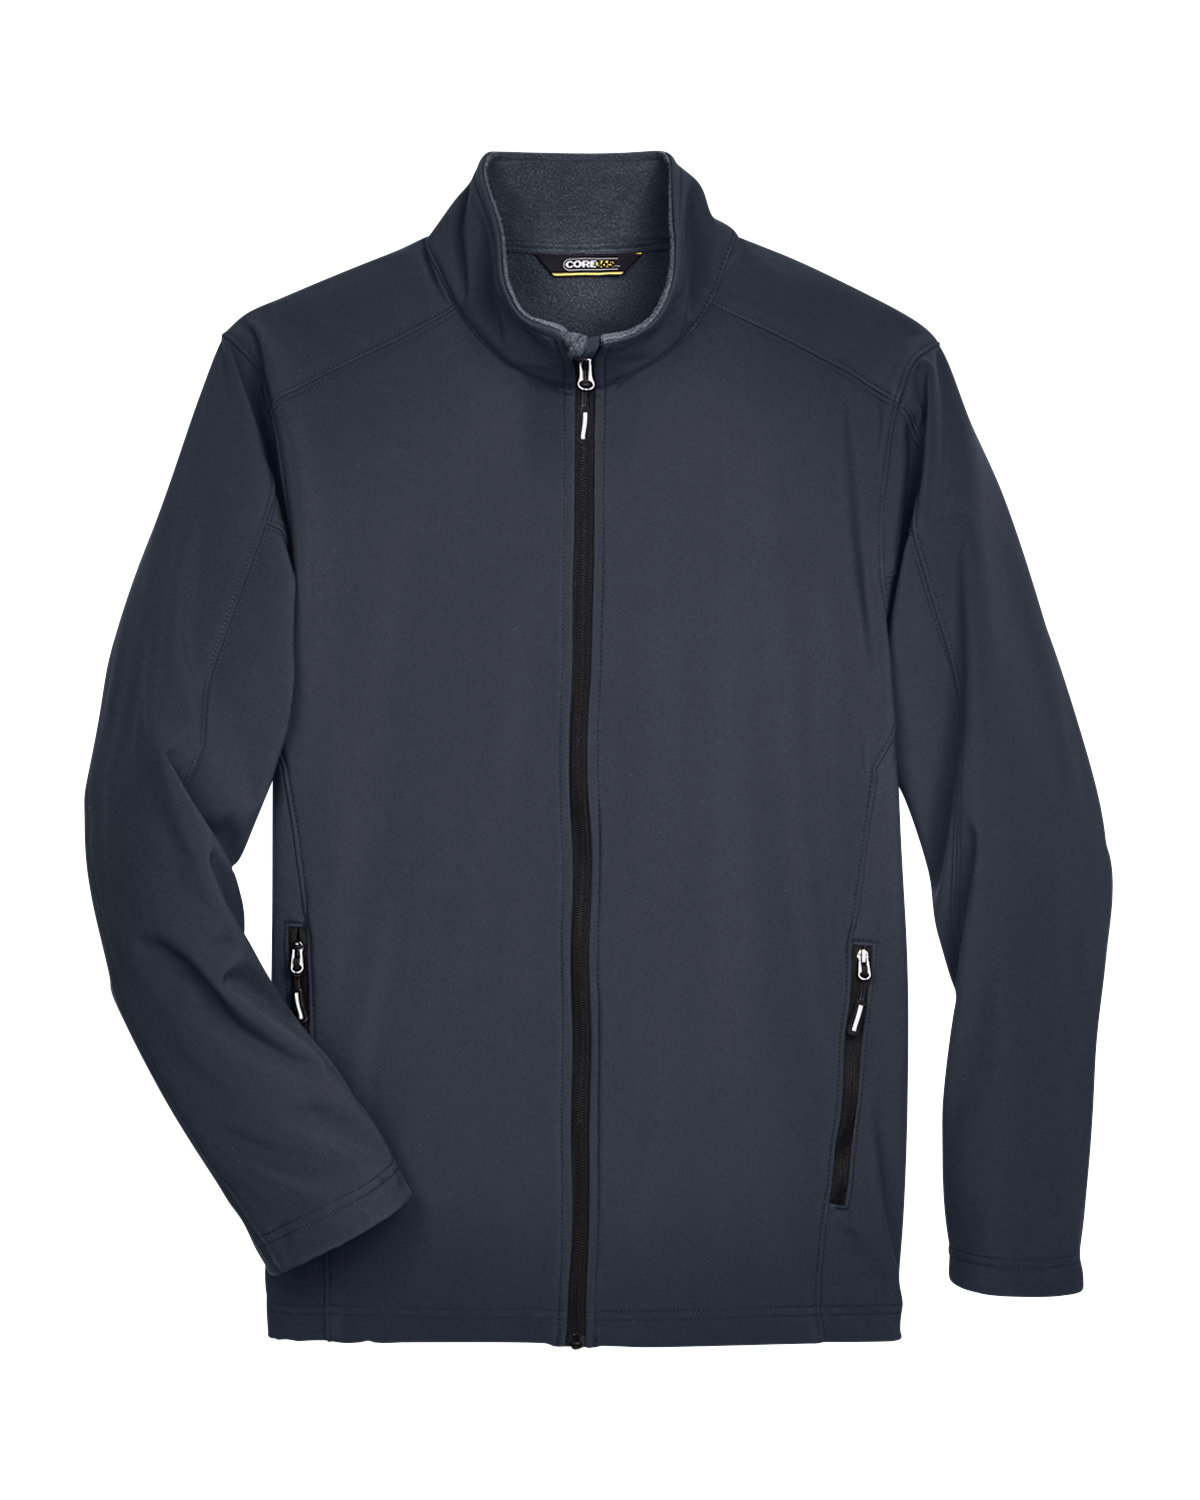 Picture of Core365 Men's 2-Layer Fleece Softshell Bonded Jacket